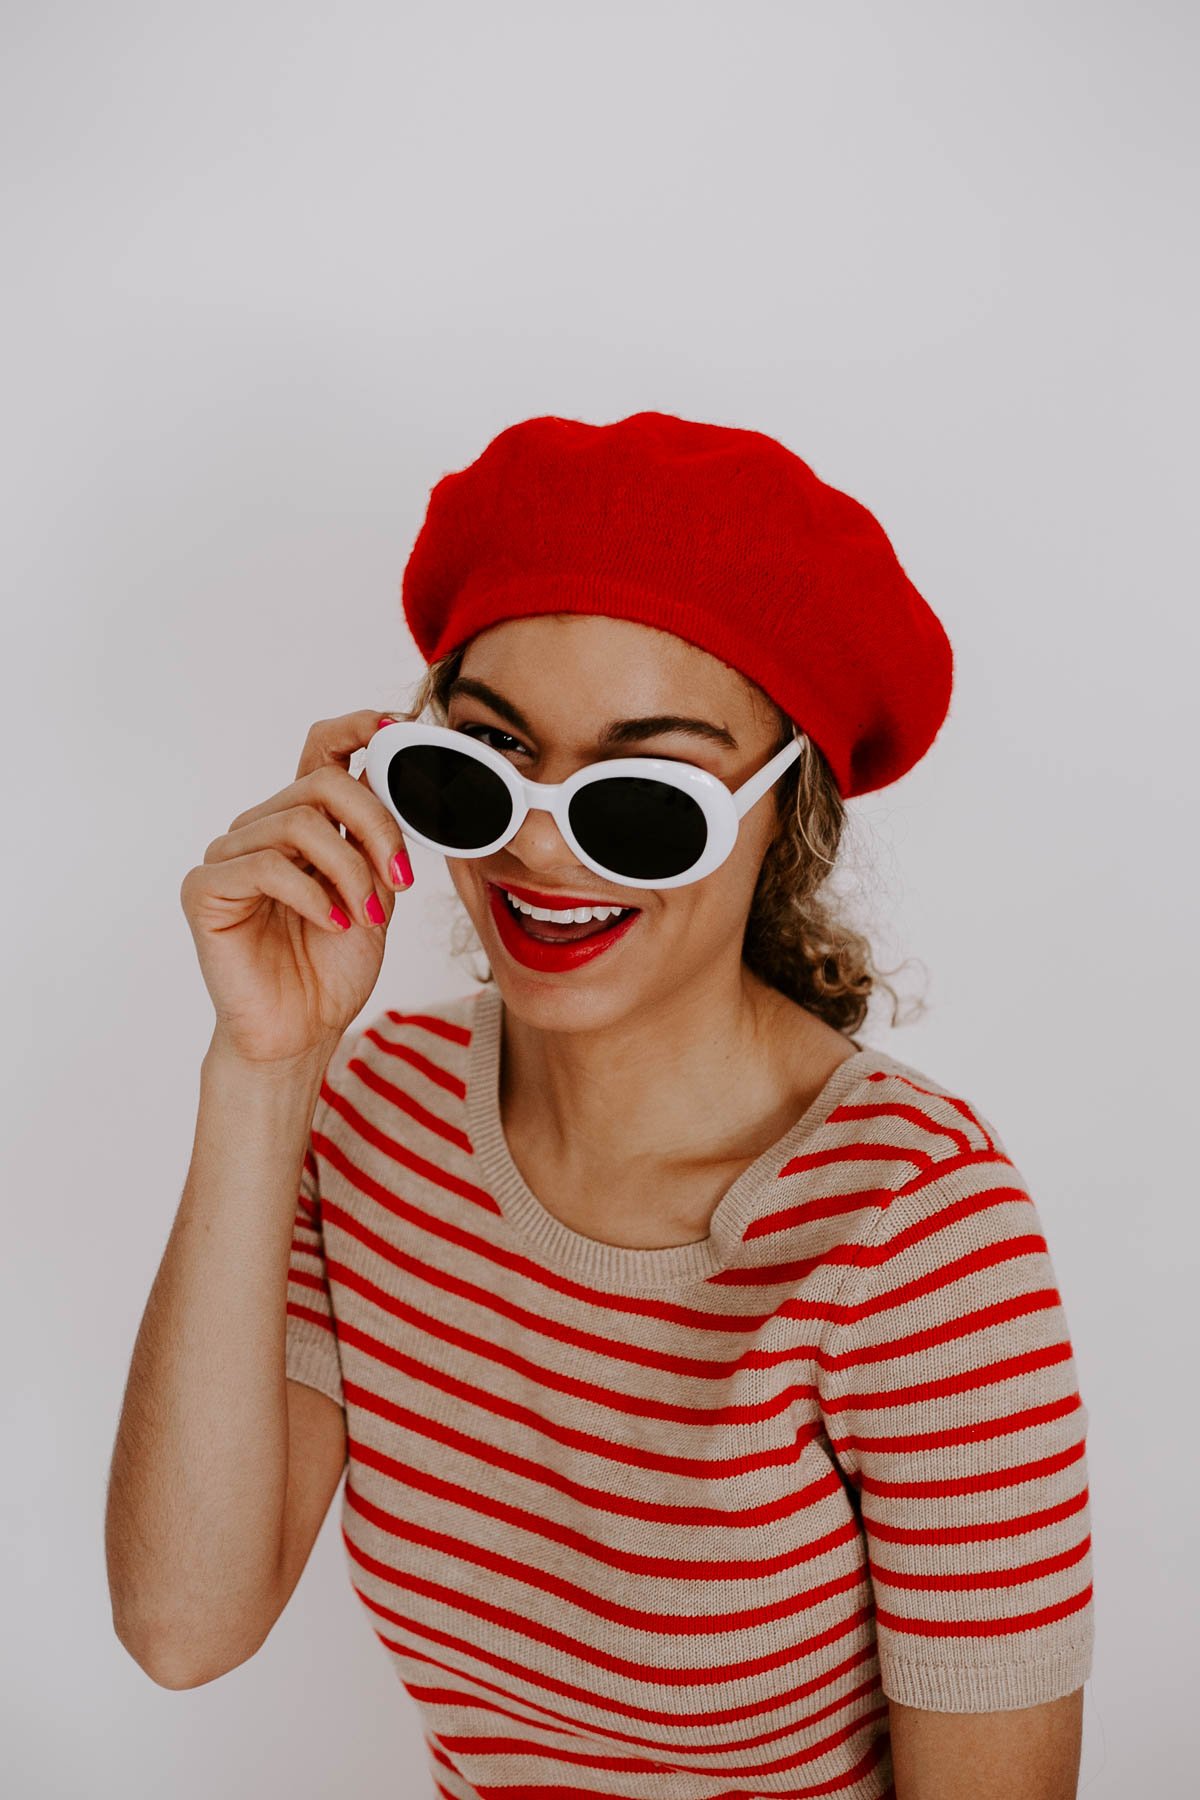 This red Parisian chic outfit with the striped top and beret is what all French style outfit dreams are made of!